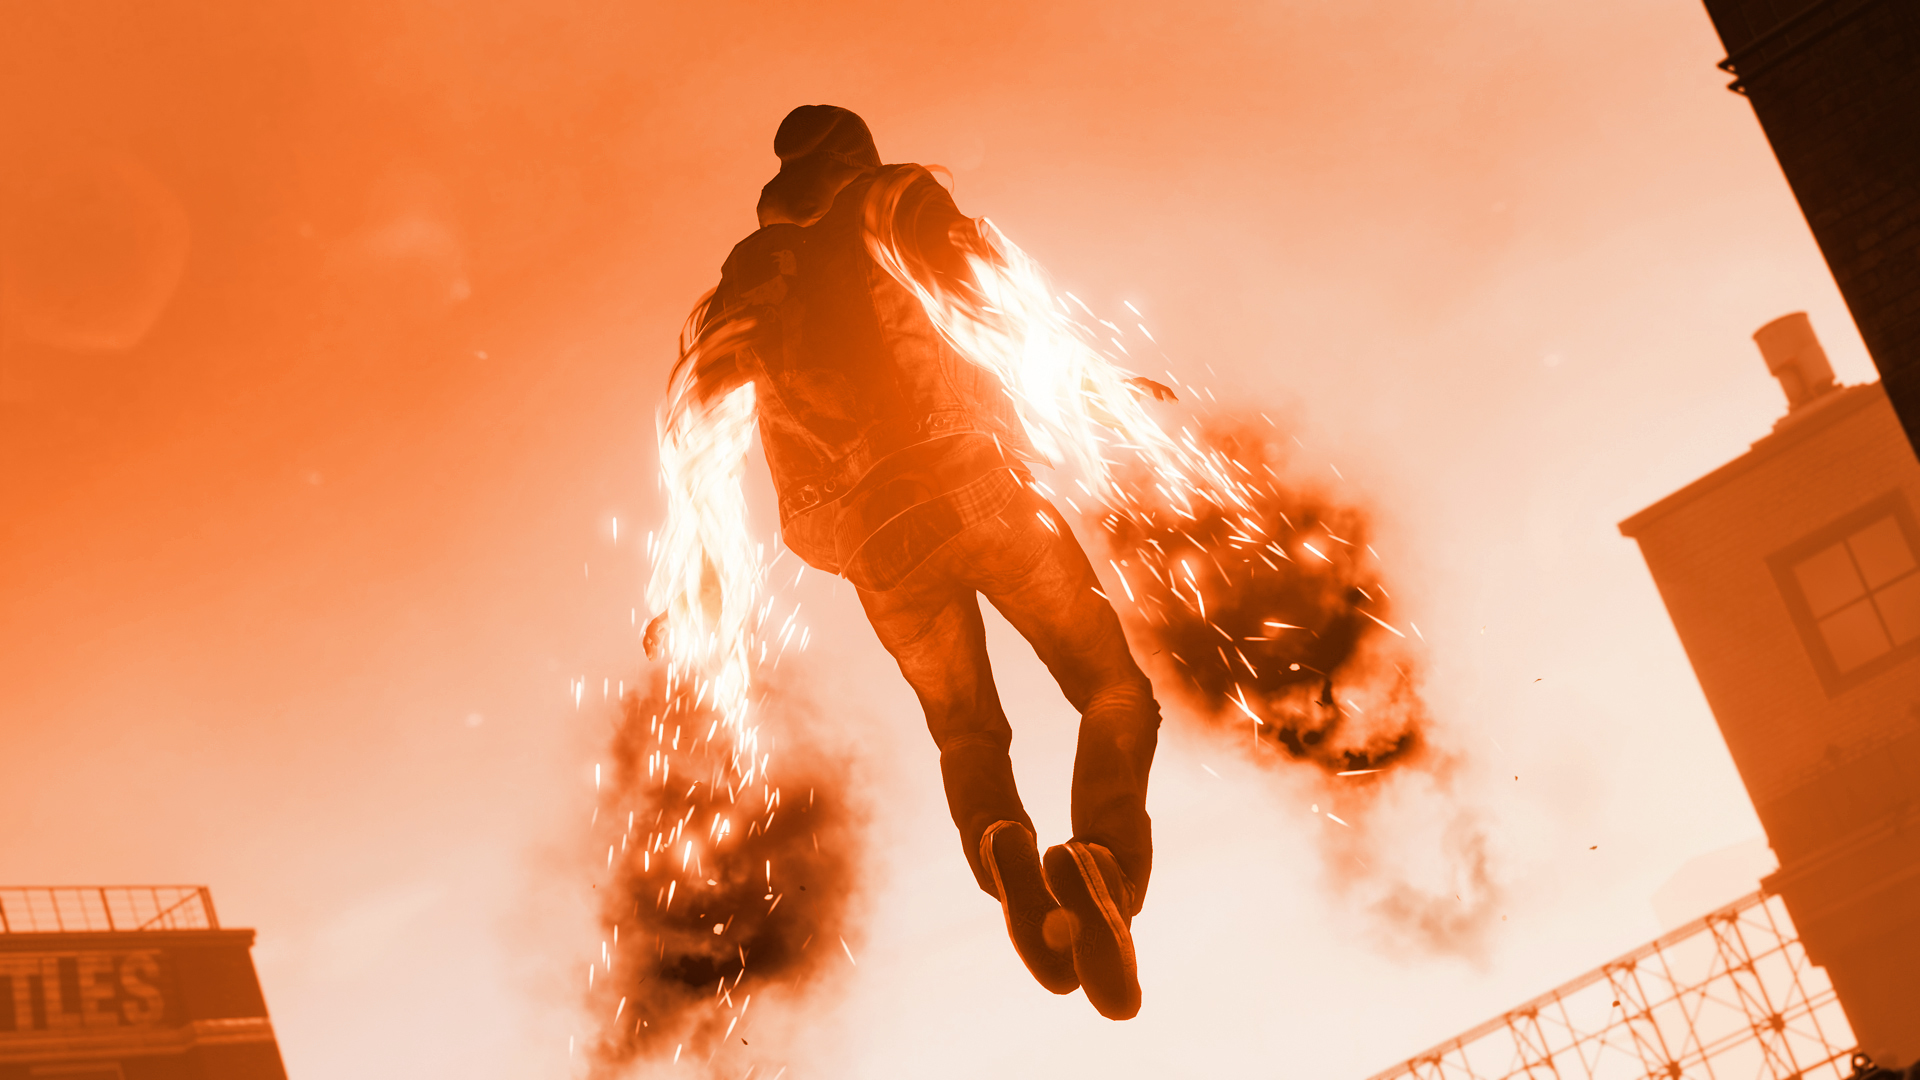 Infamous Second Son Orange Smoke Wallpaper 4 by XtremisMaster on ...